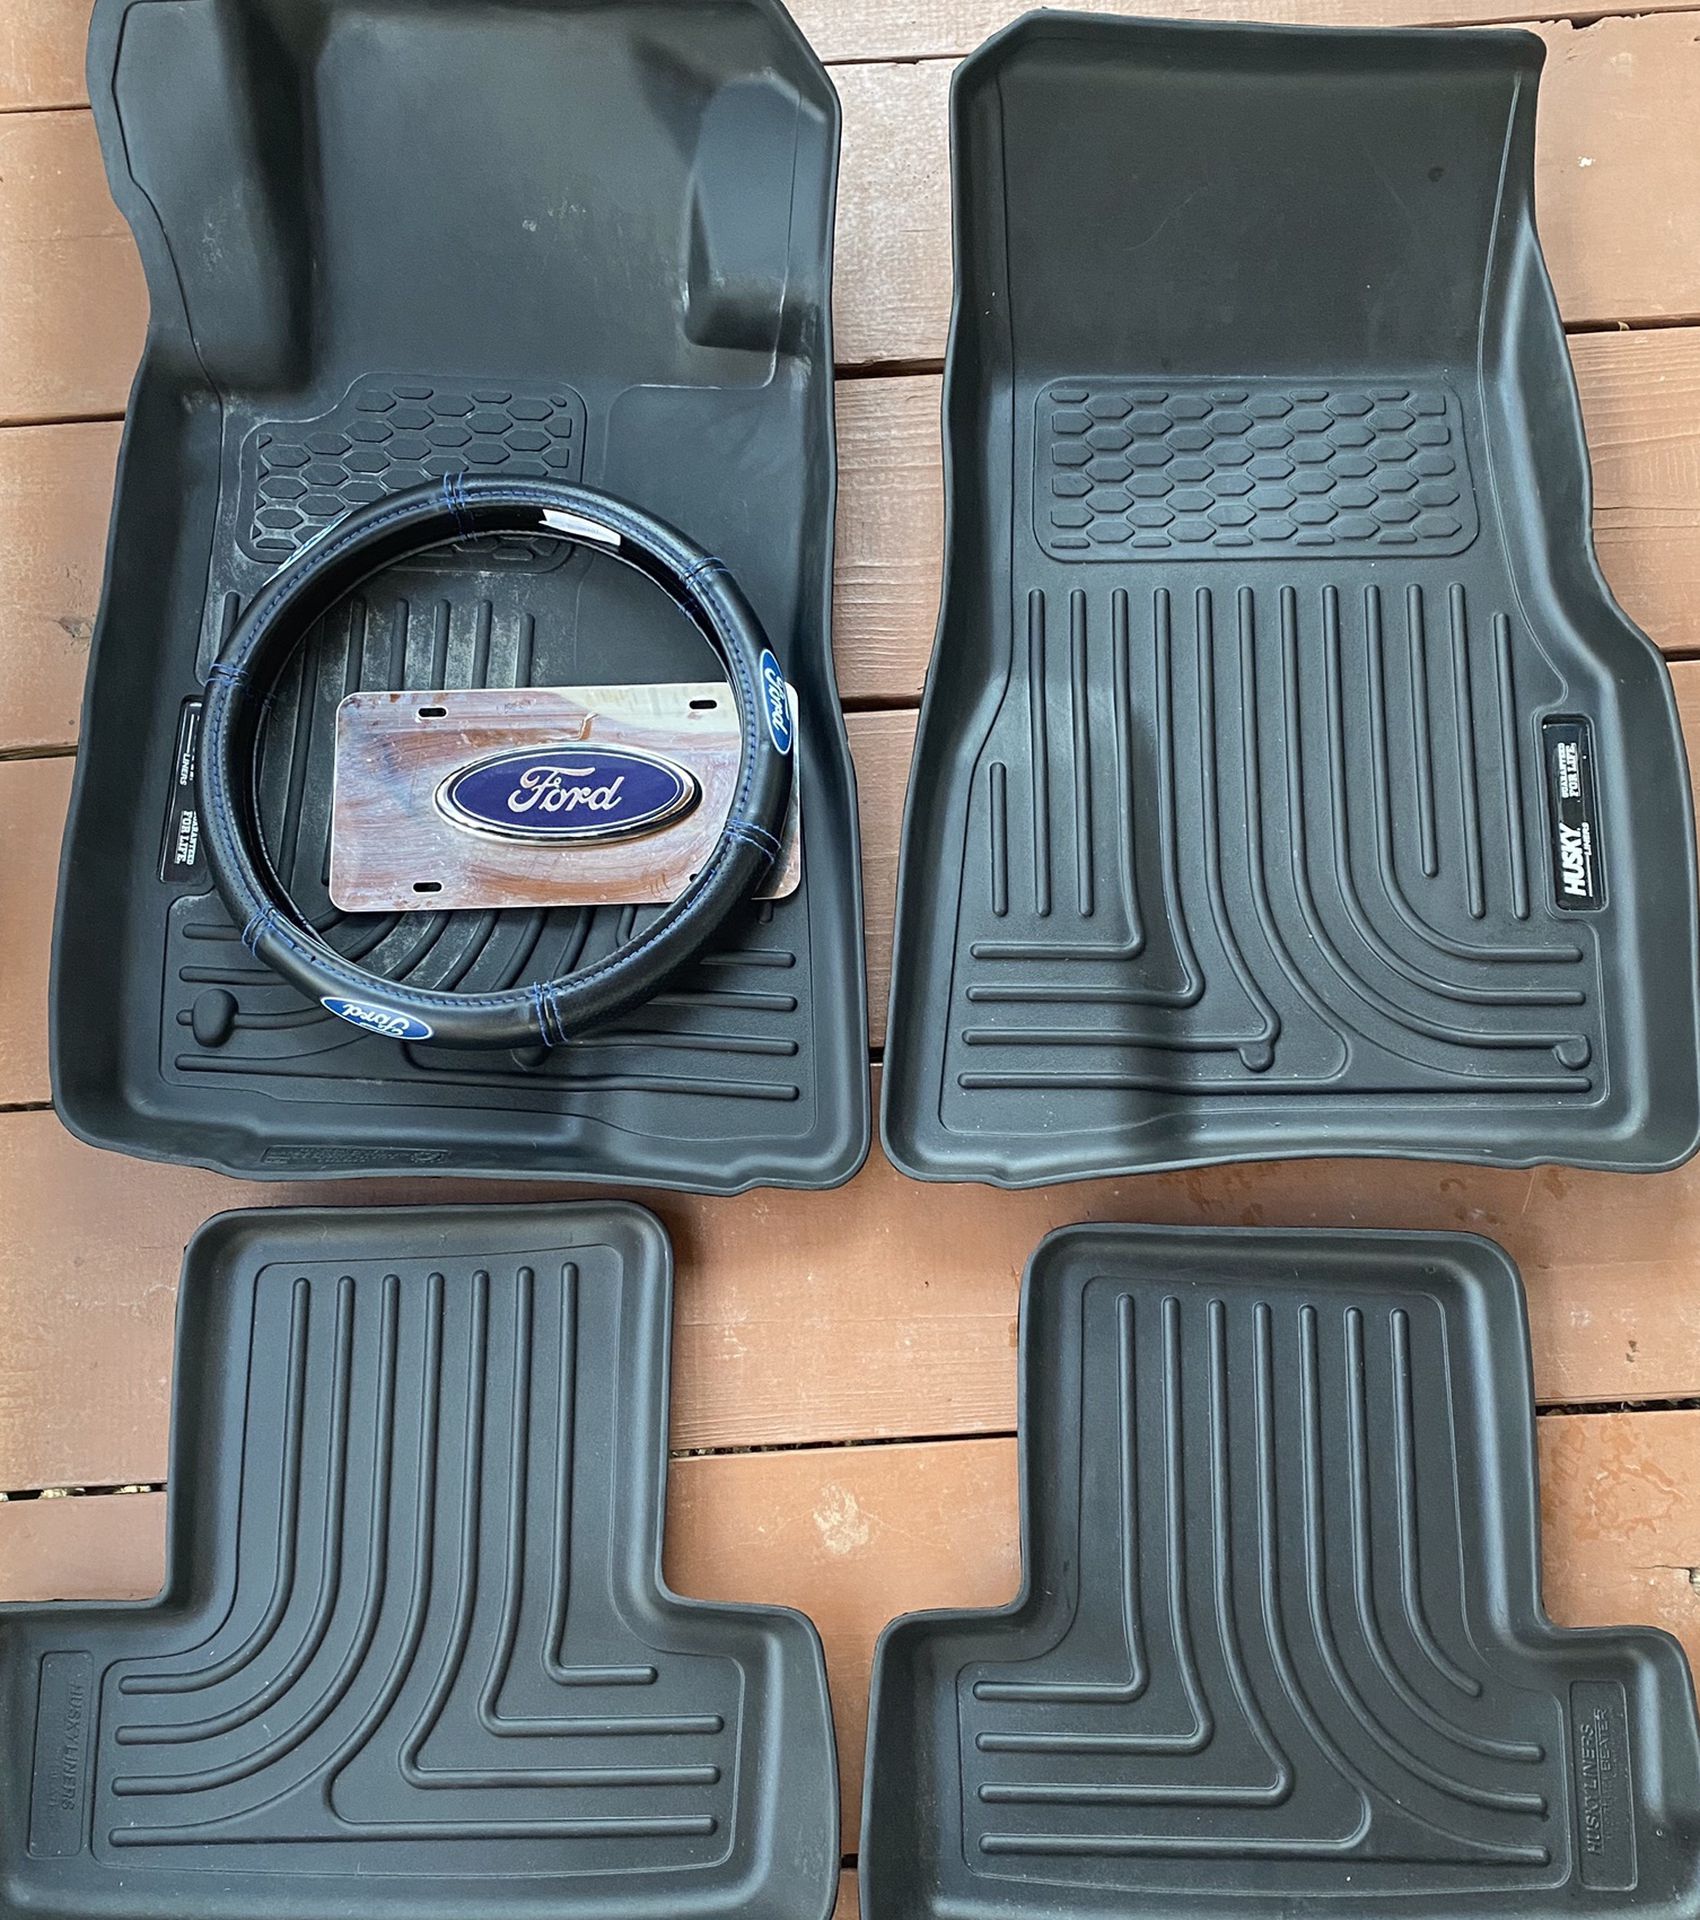 Mustang Floor Mats, A Ford Chrome License Plate, And A Ford Steering Wheel Cover.